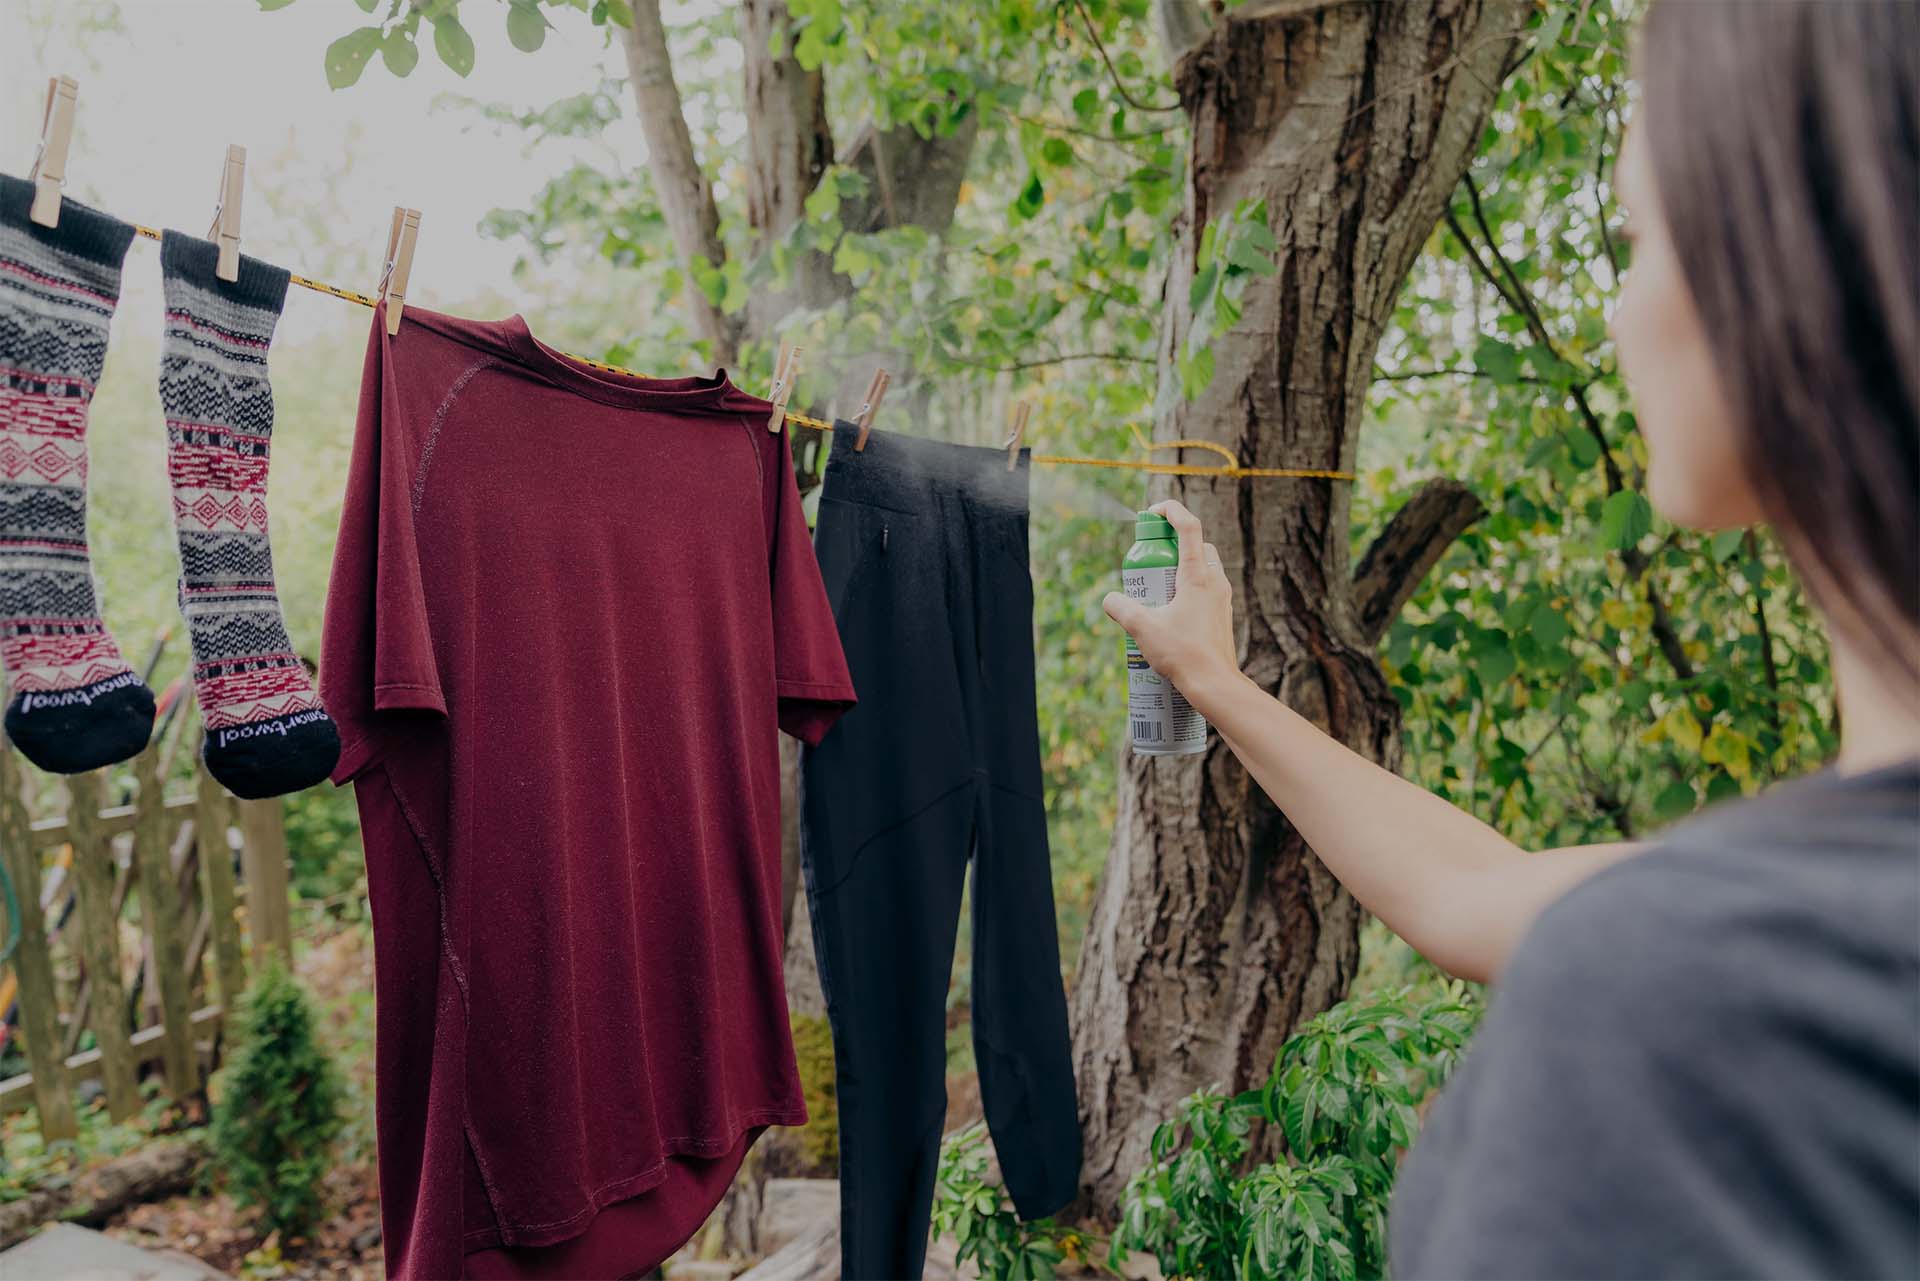 Woman treating clothes with permethrin spray.